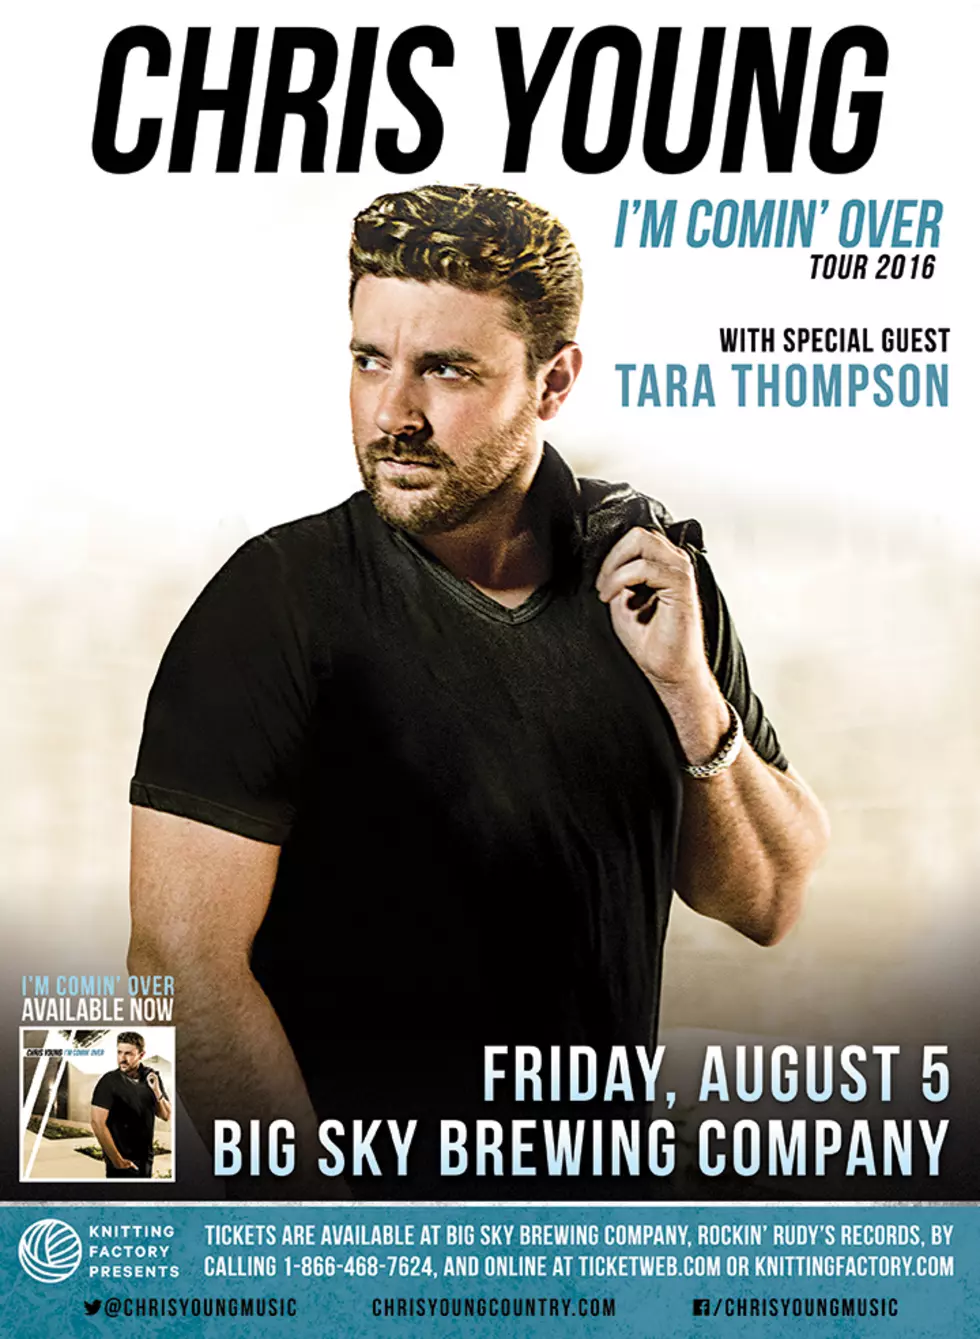 Top 3 Songs I Cannot Wait for Chris Young to Perform Tomorrow in Missoula!